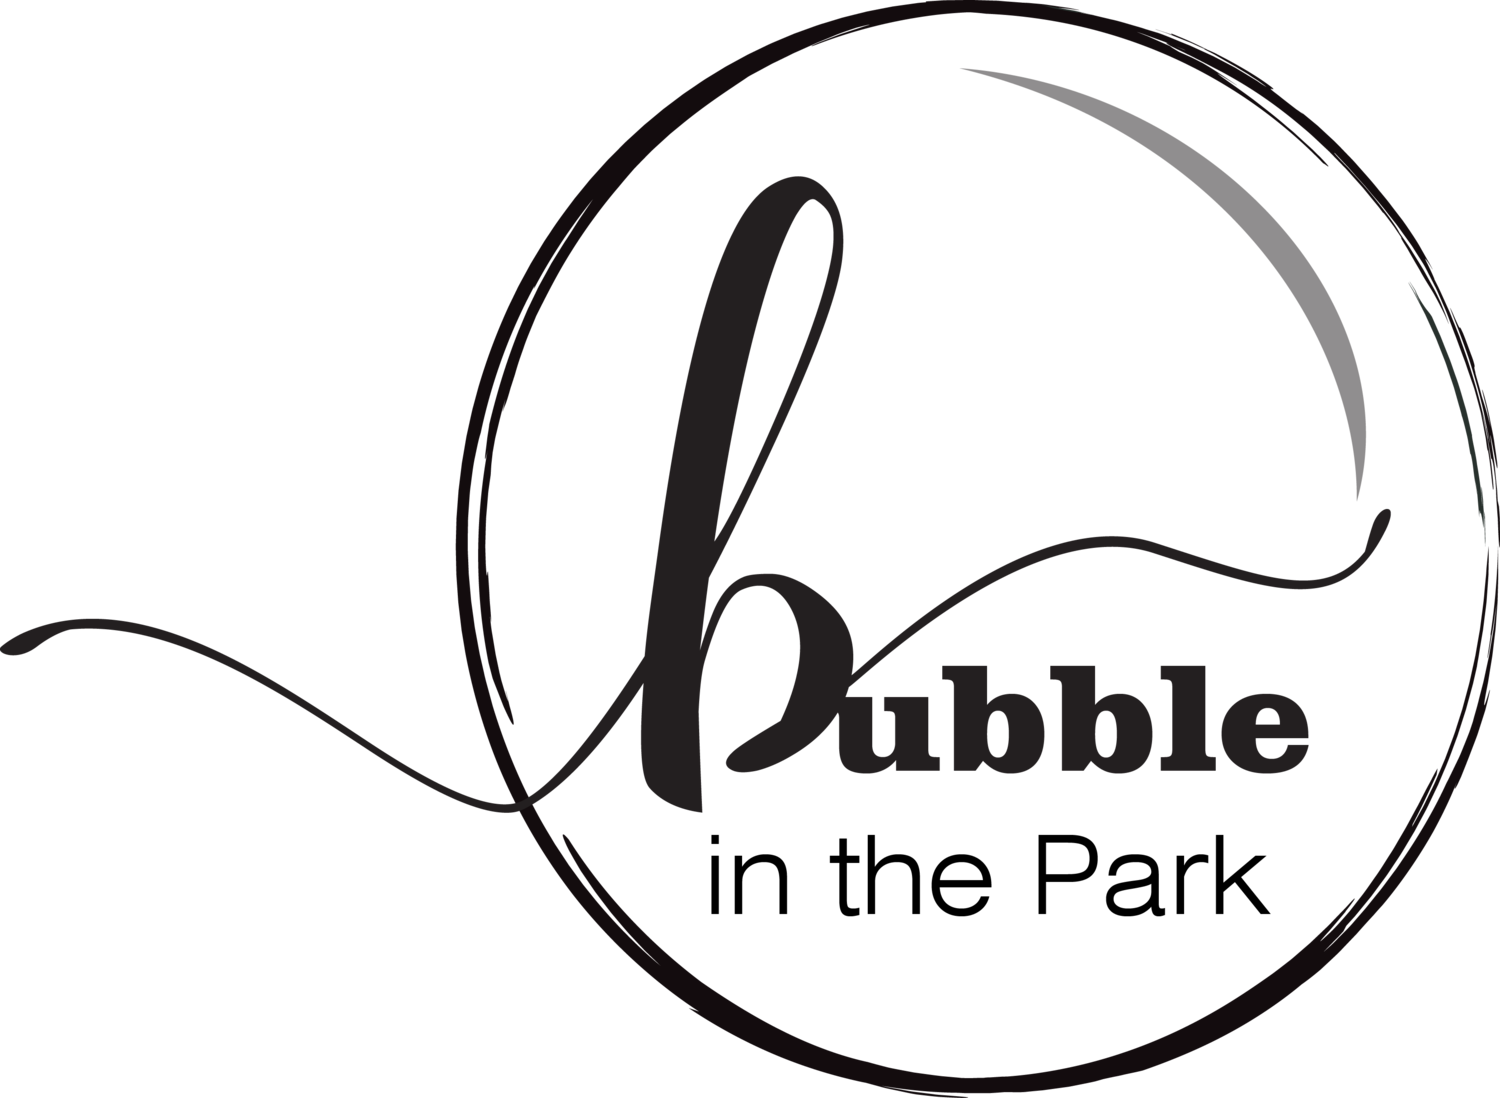 Bubble in the Park